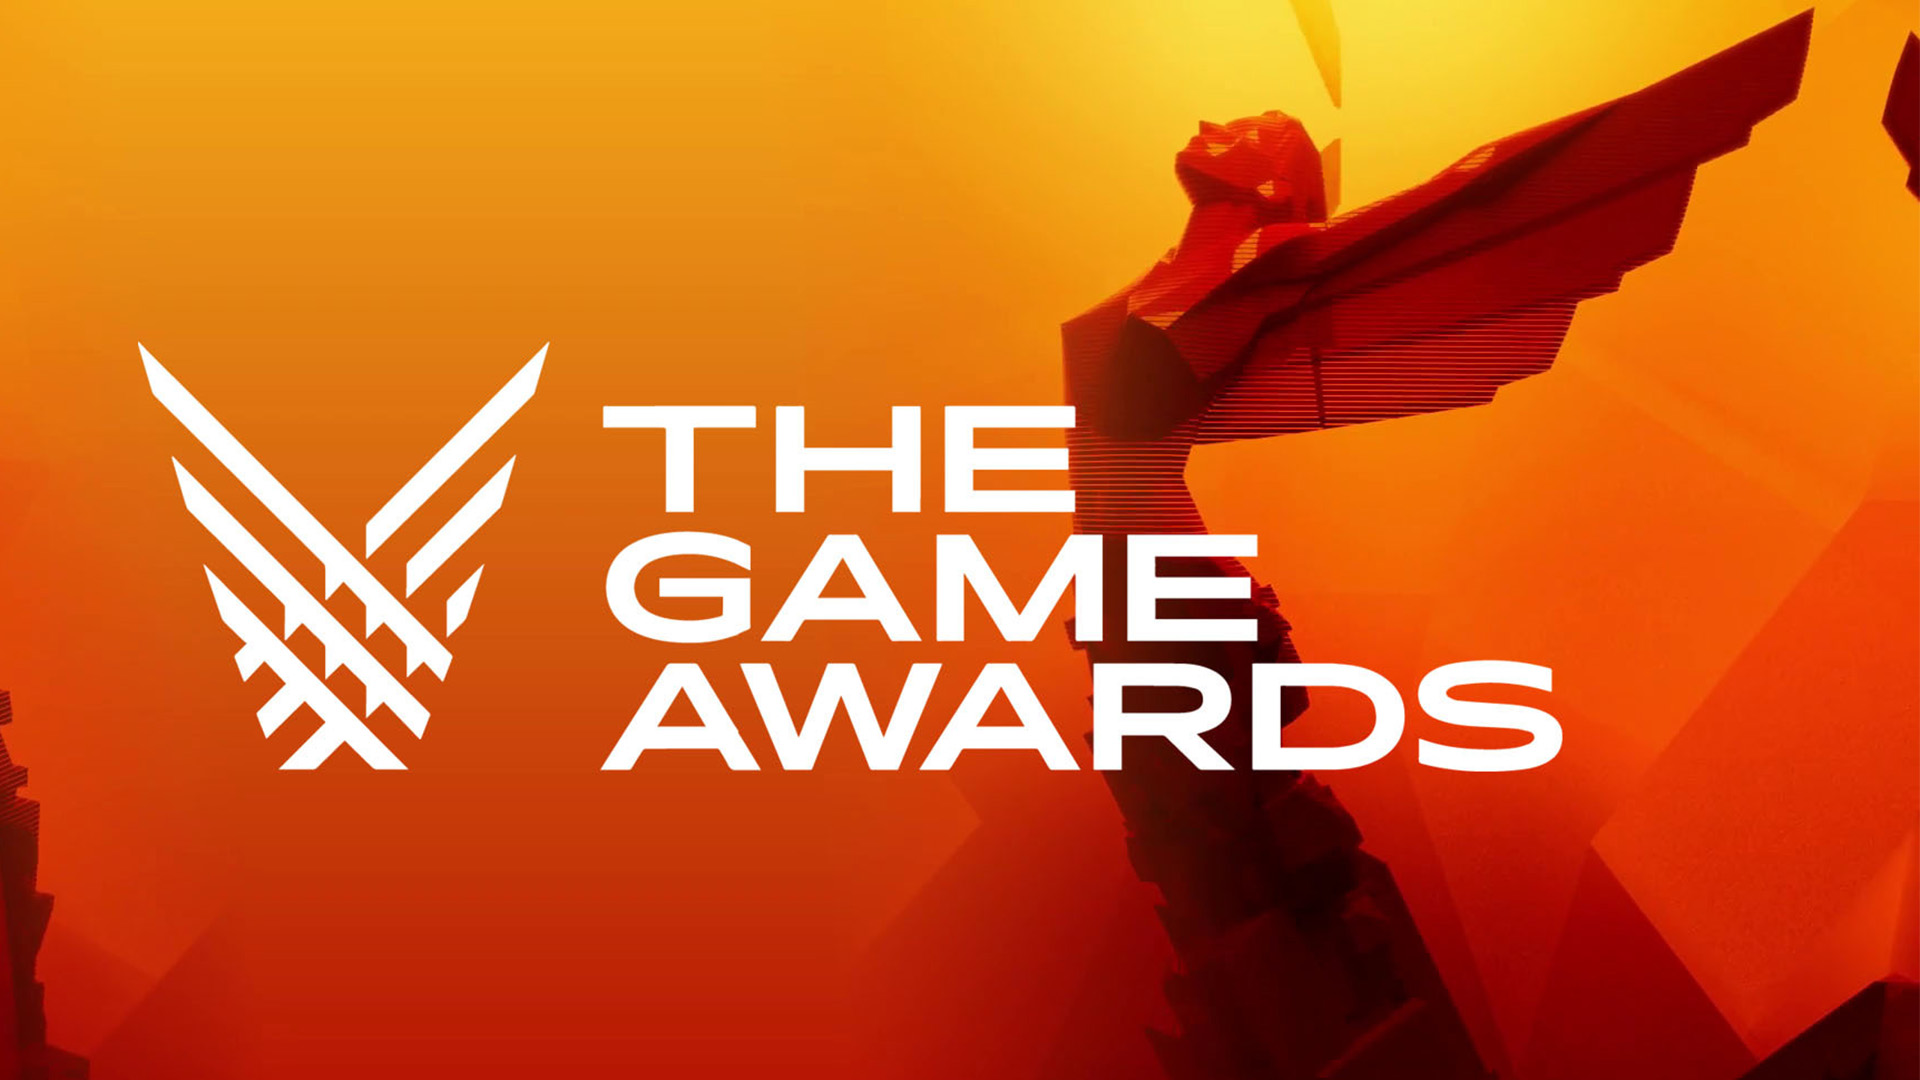 It’s Official…Video Game Awards Are Dead